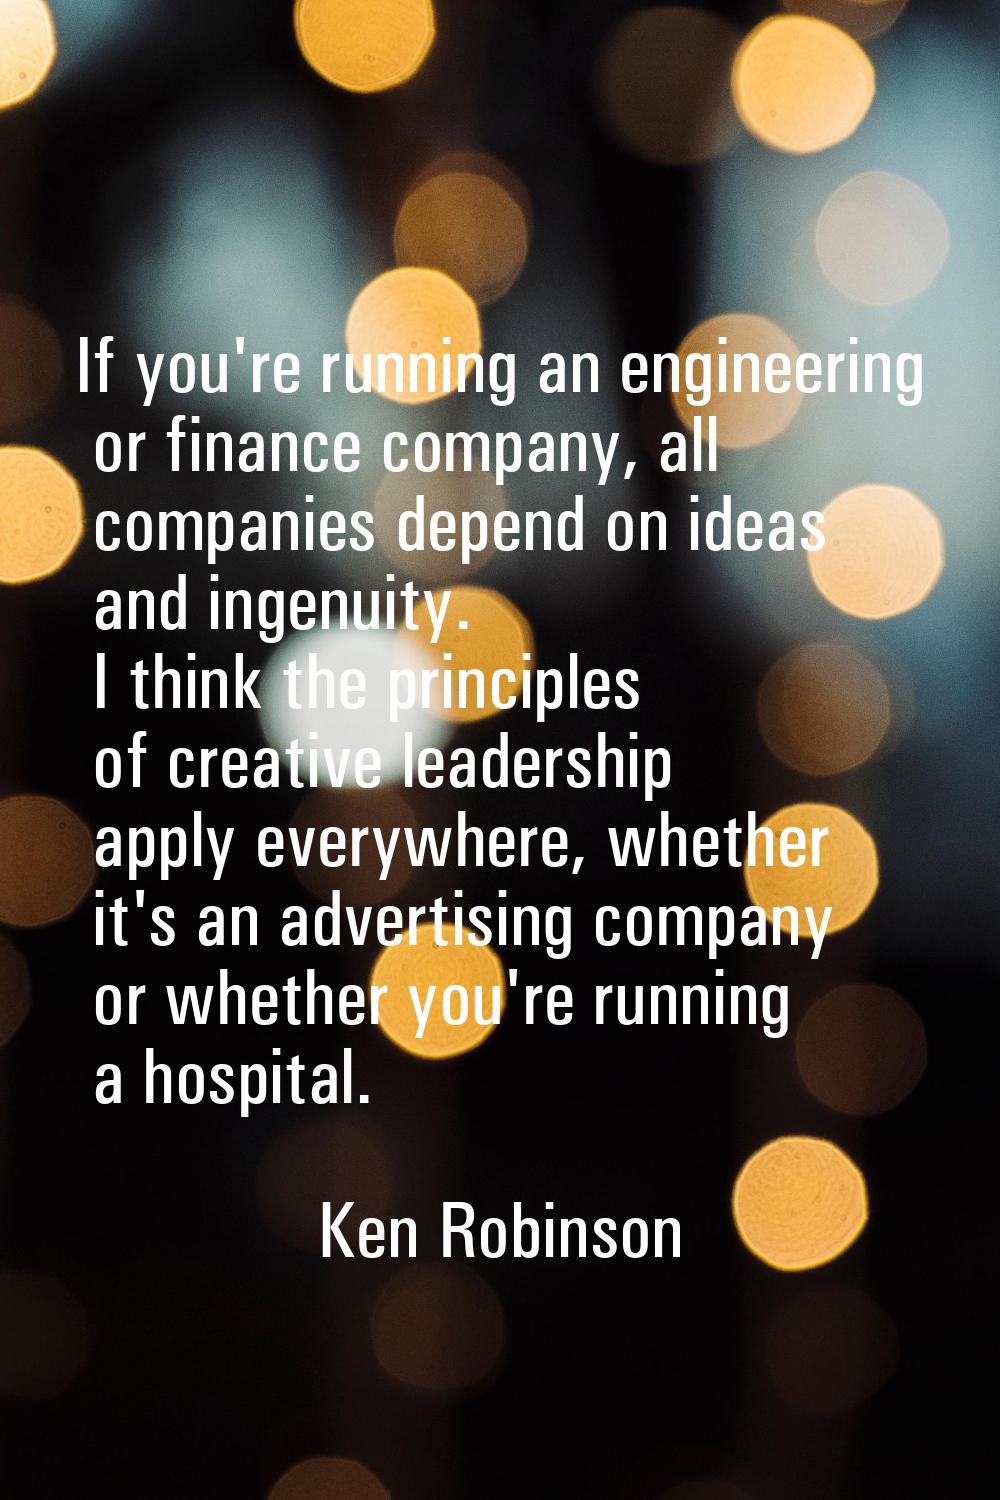 If you're running an engineering or finance company, all companies depend on ideas and ingenuity. I